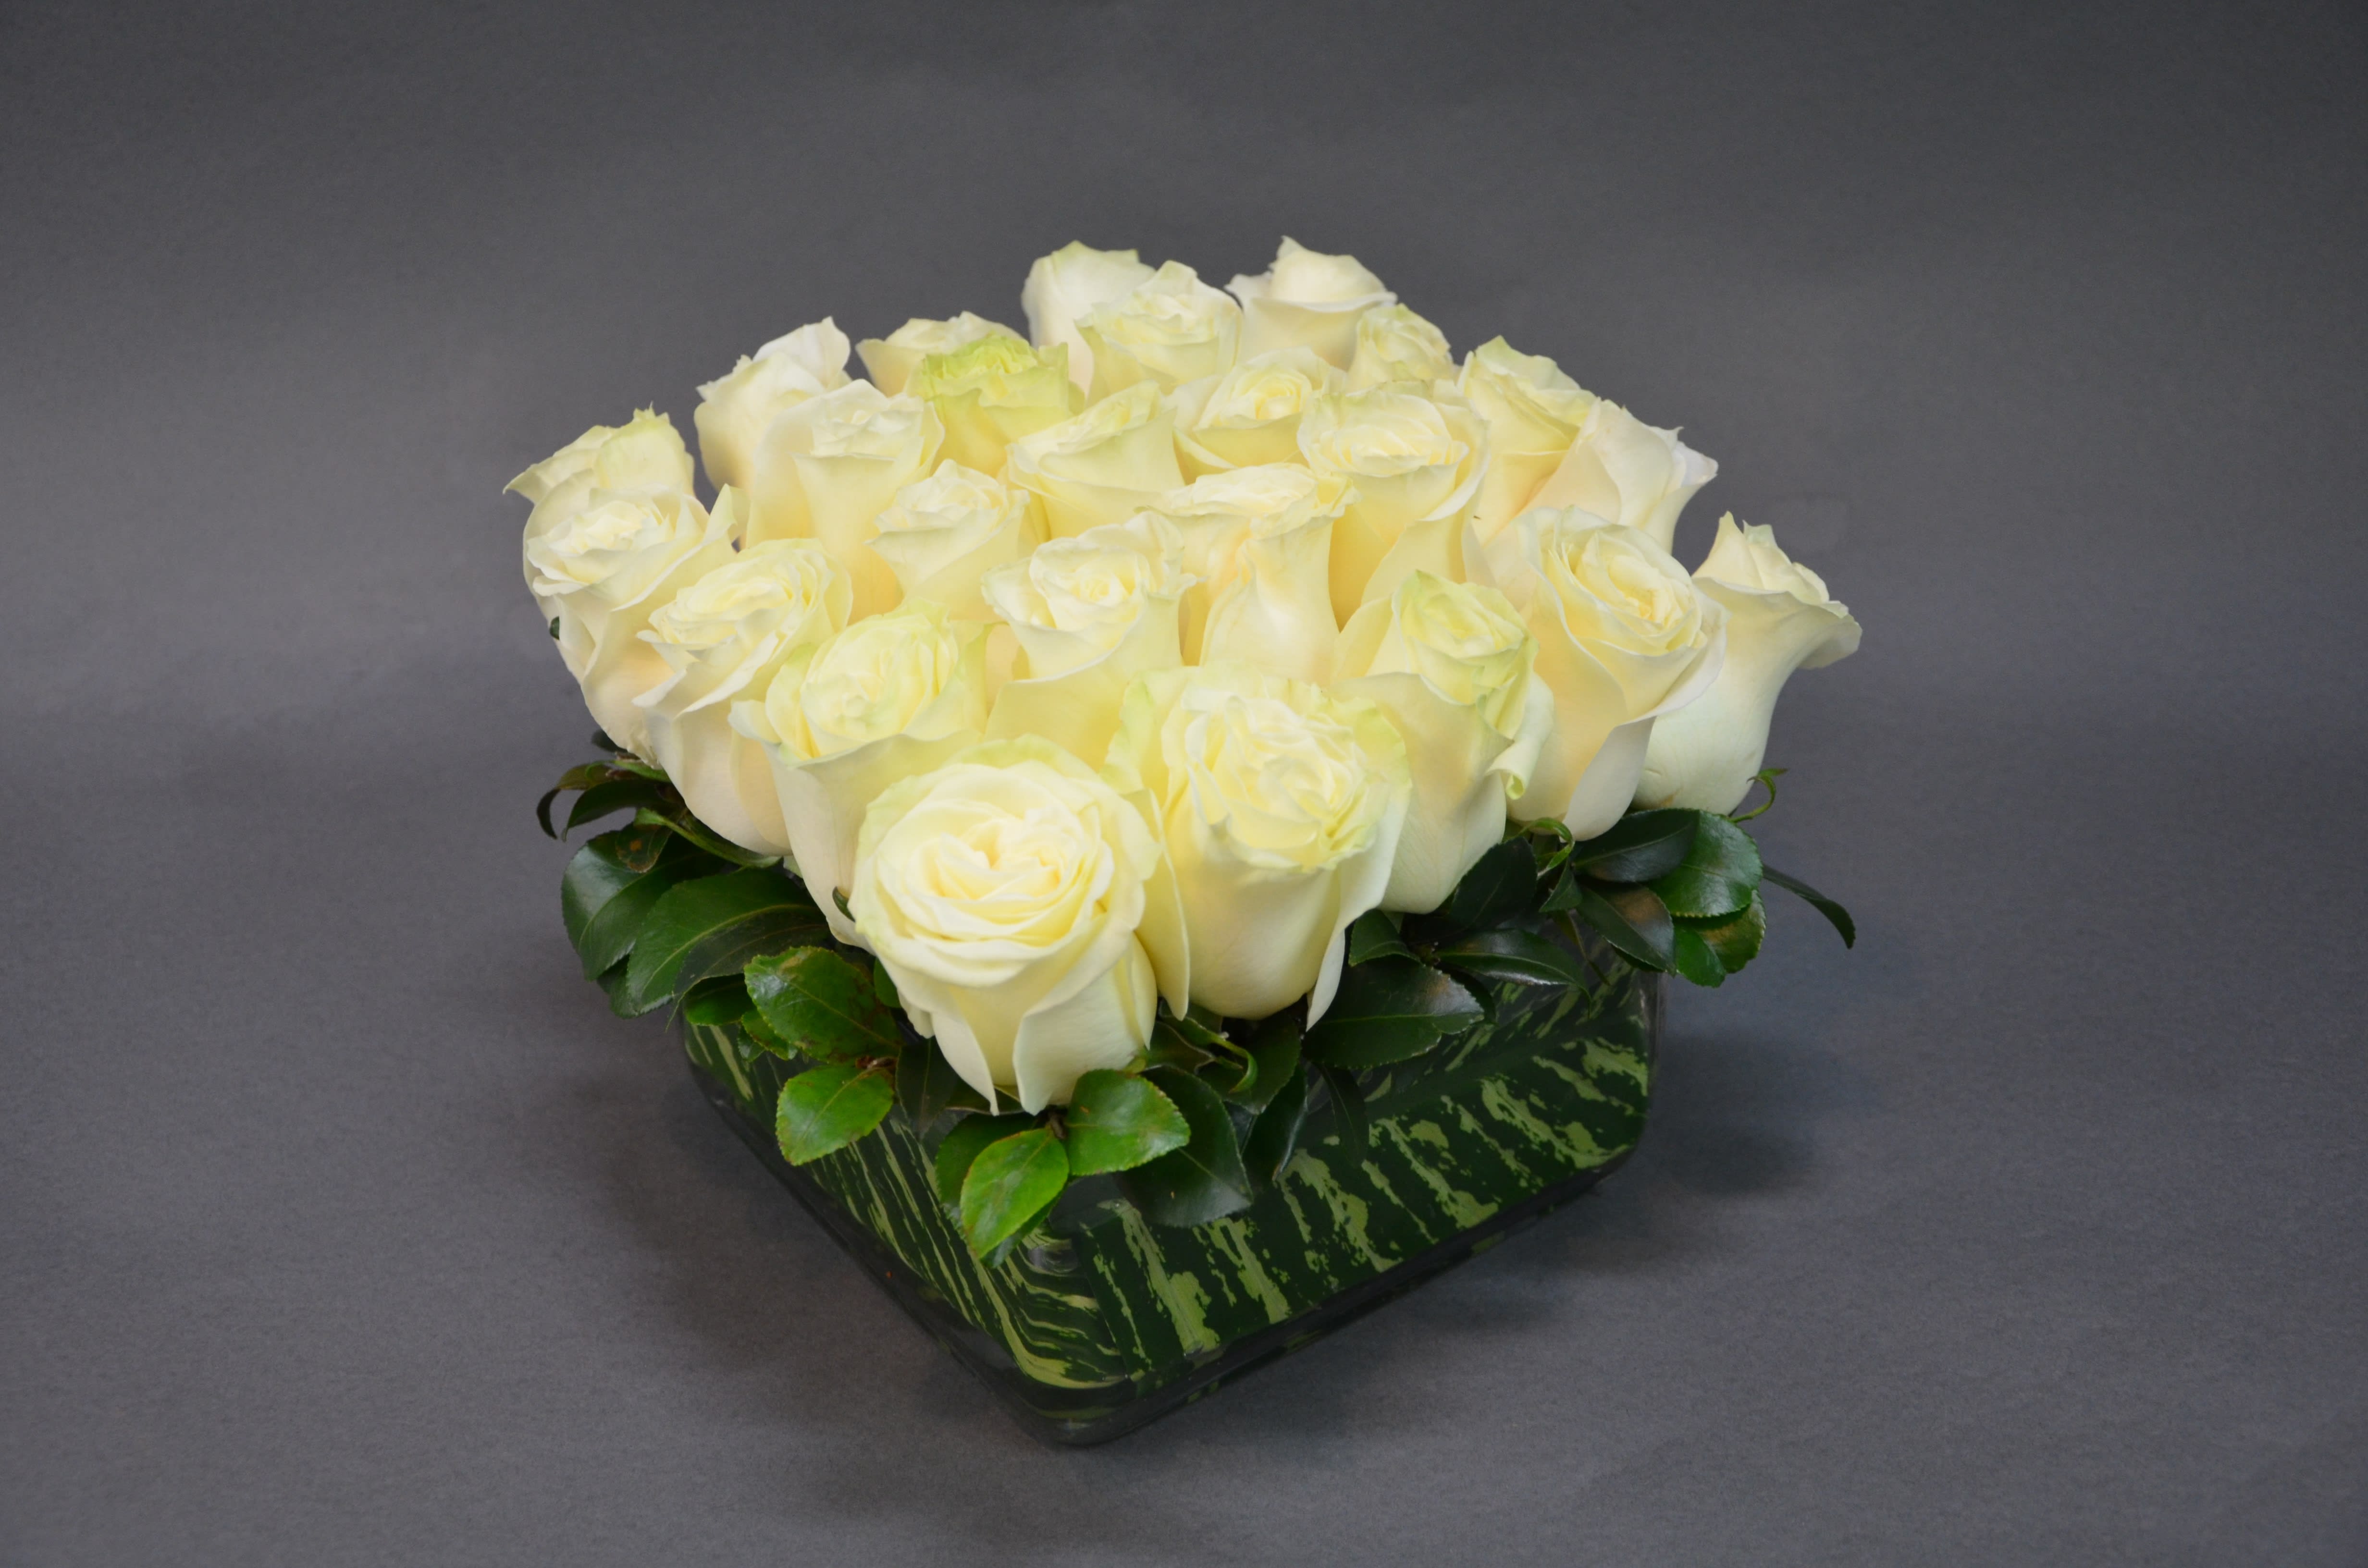 Perfectly Paired  - For Those who Seek to Illuminate their World  with Pure Extraordinary Beauty, White Never Fails to Exceed Expectations.  Pristine White Roses in a Clear Glass Rectangular Vase Accented with Glossy Foliage    